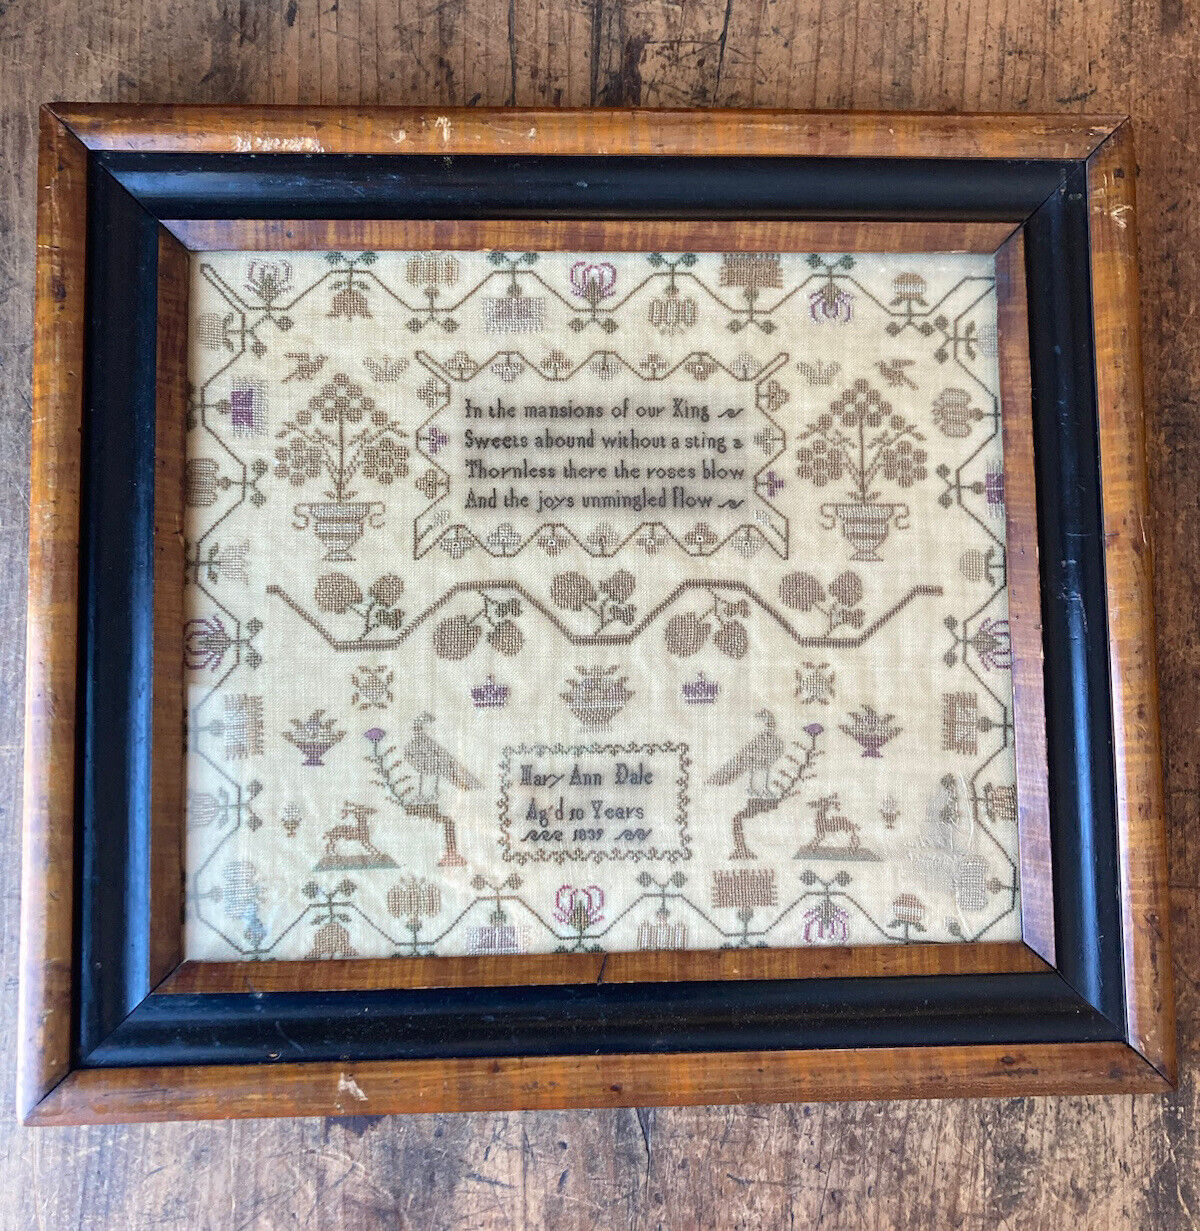 Fancy Antique DATED 1839 Needlework Sampler Highly Figural Mary Ann Dale